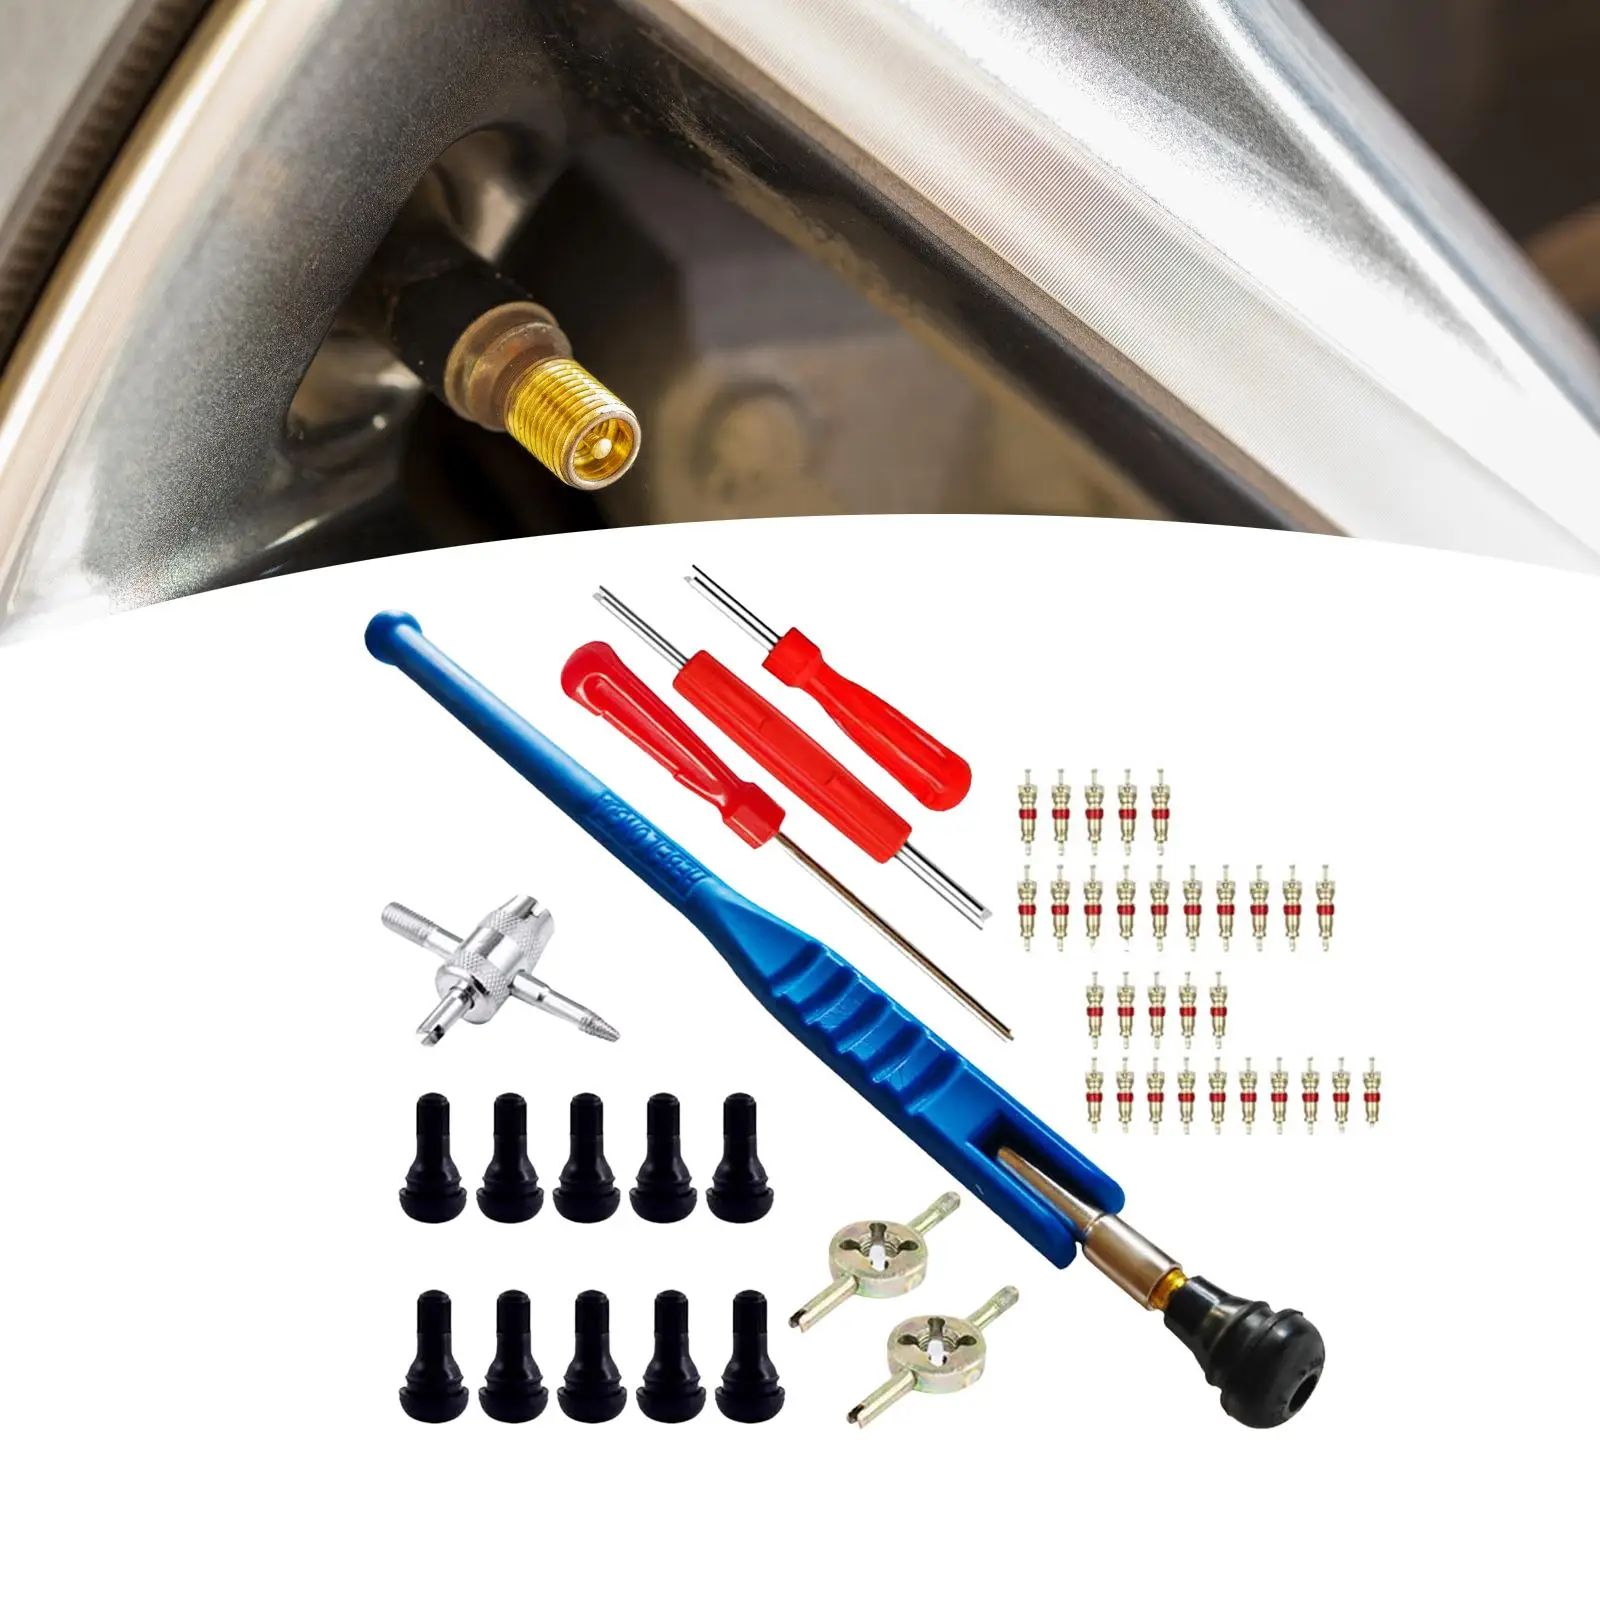 47x Tire Valve Stem Puller Tools Set Multifunctional for Motorcycle Car